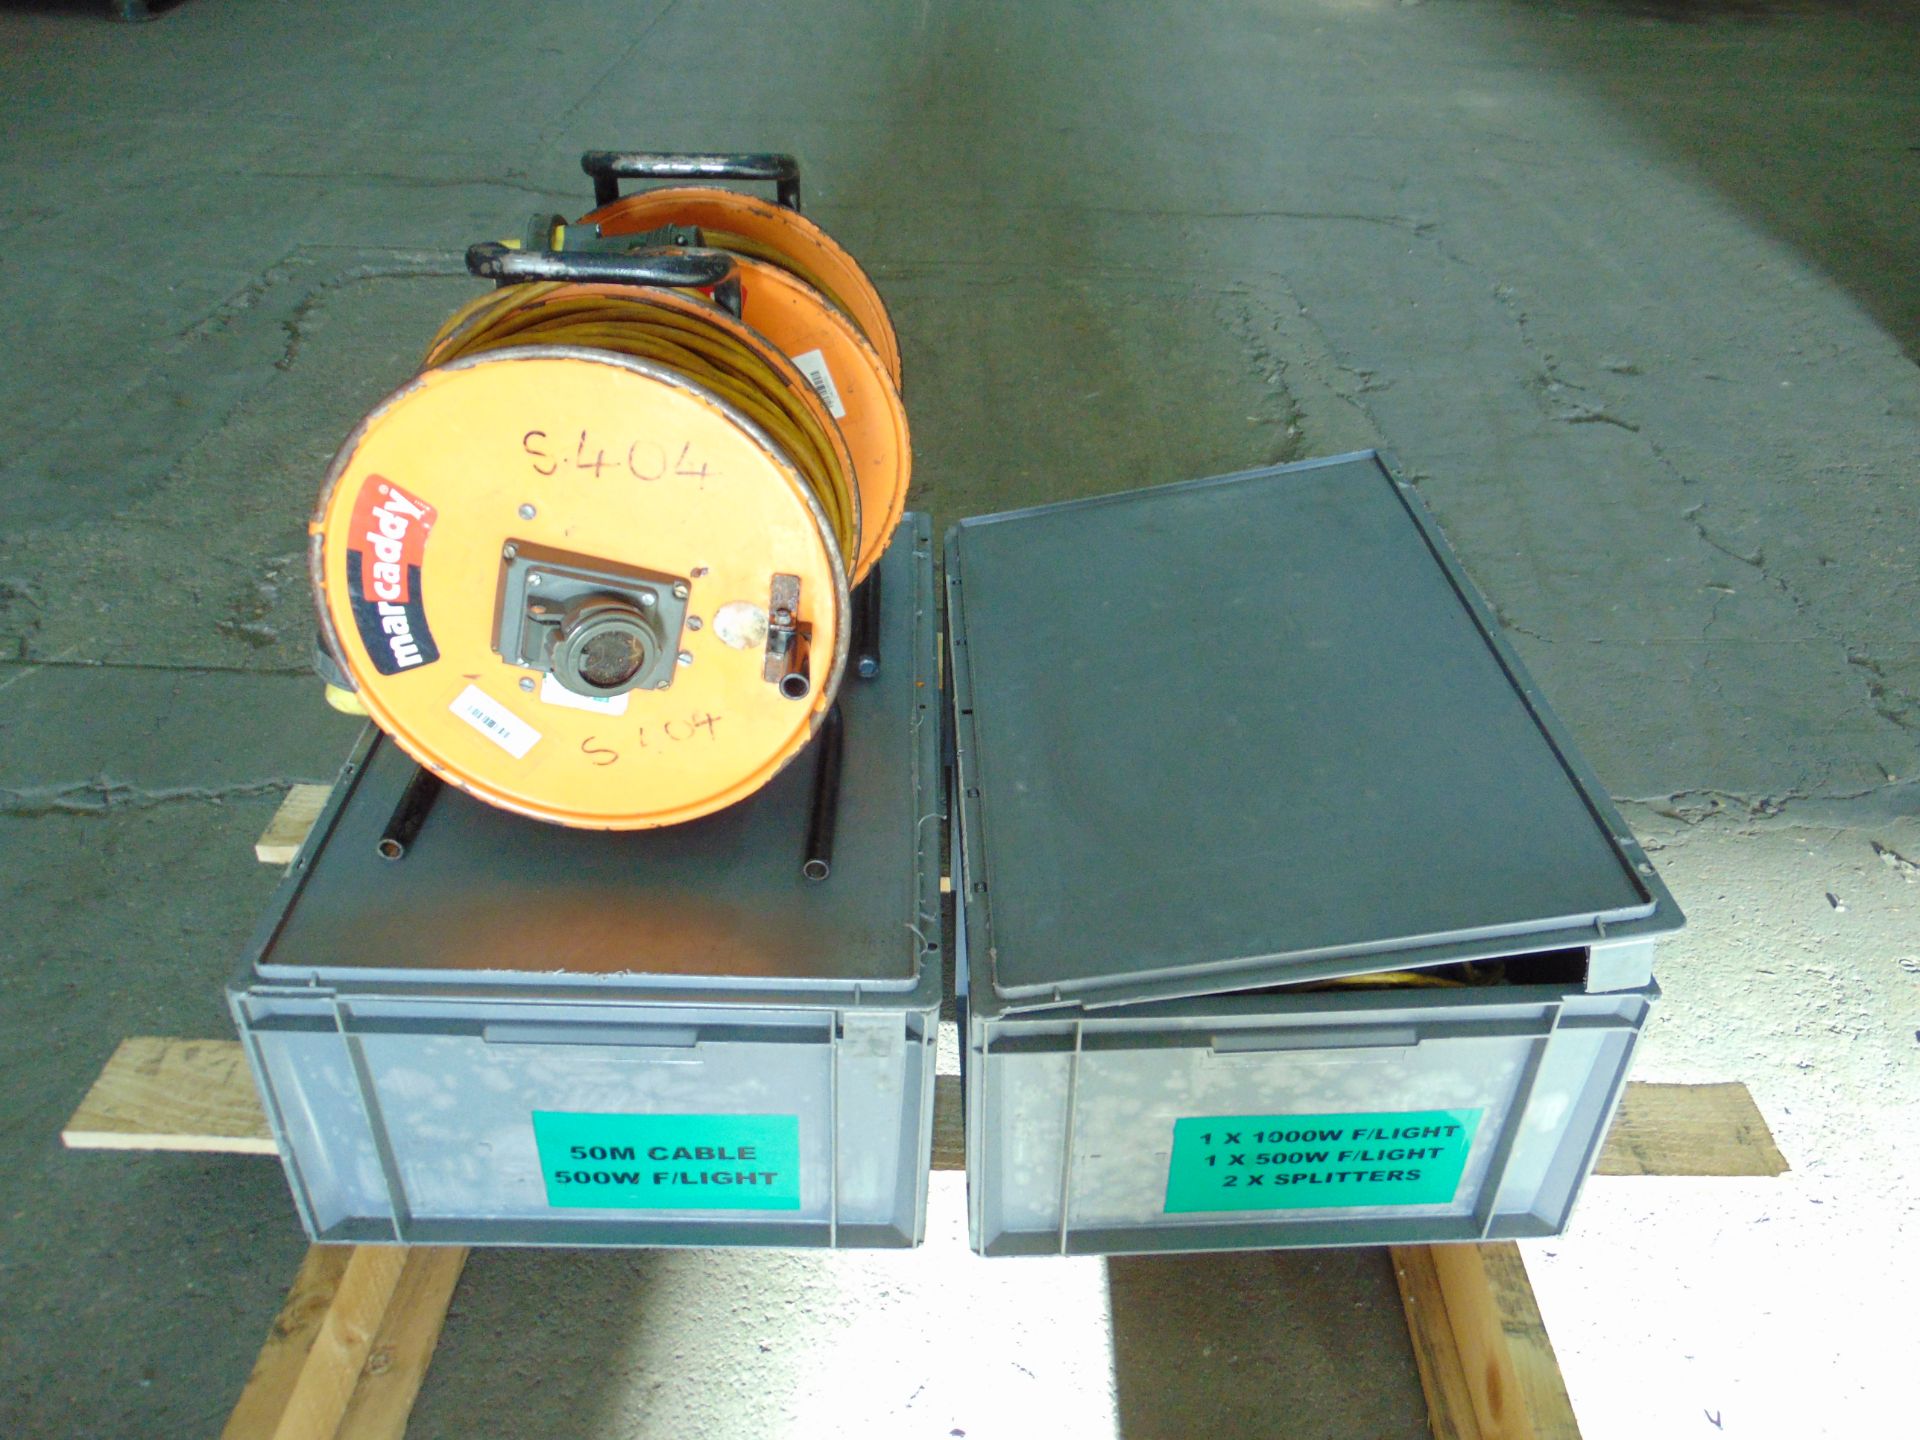 4 x Flood Lights & 2 x 50m Power Cable Reels - Image 10 of 10